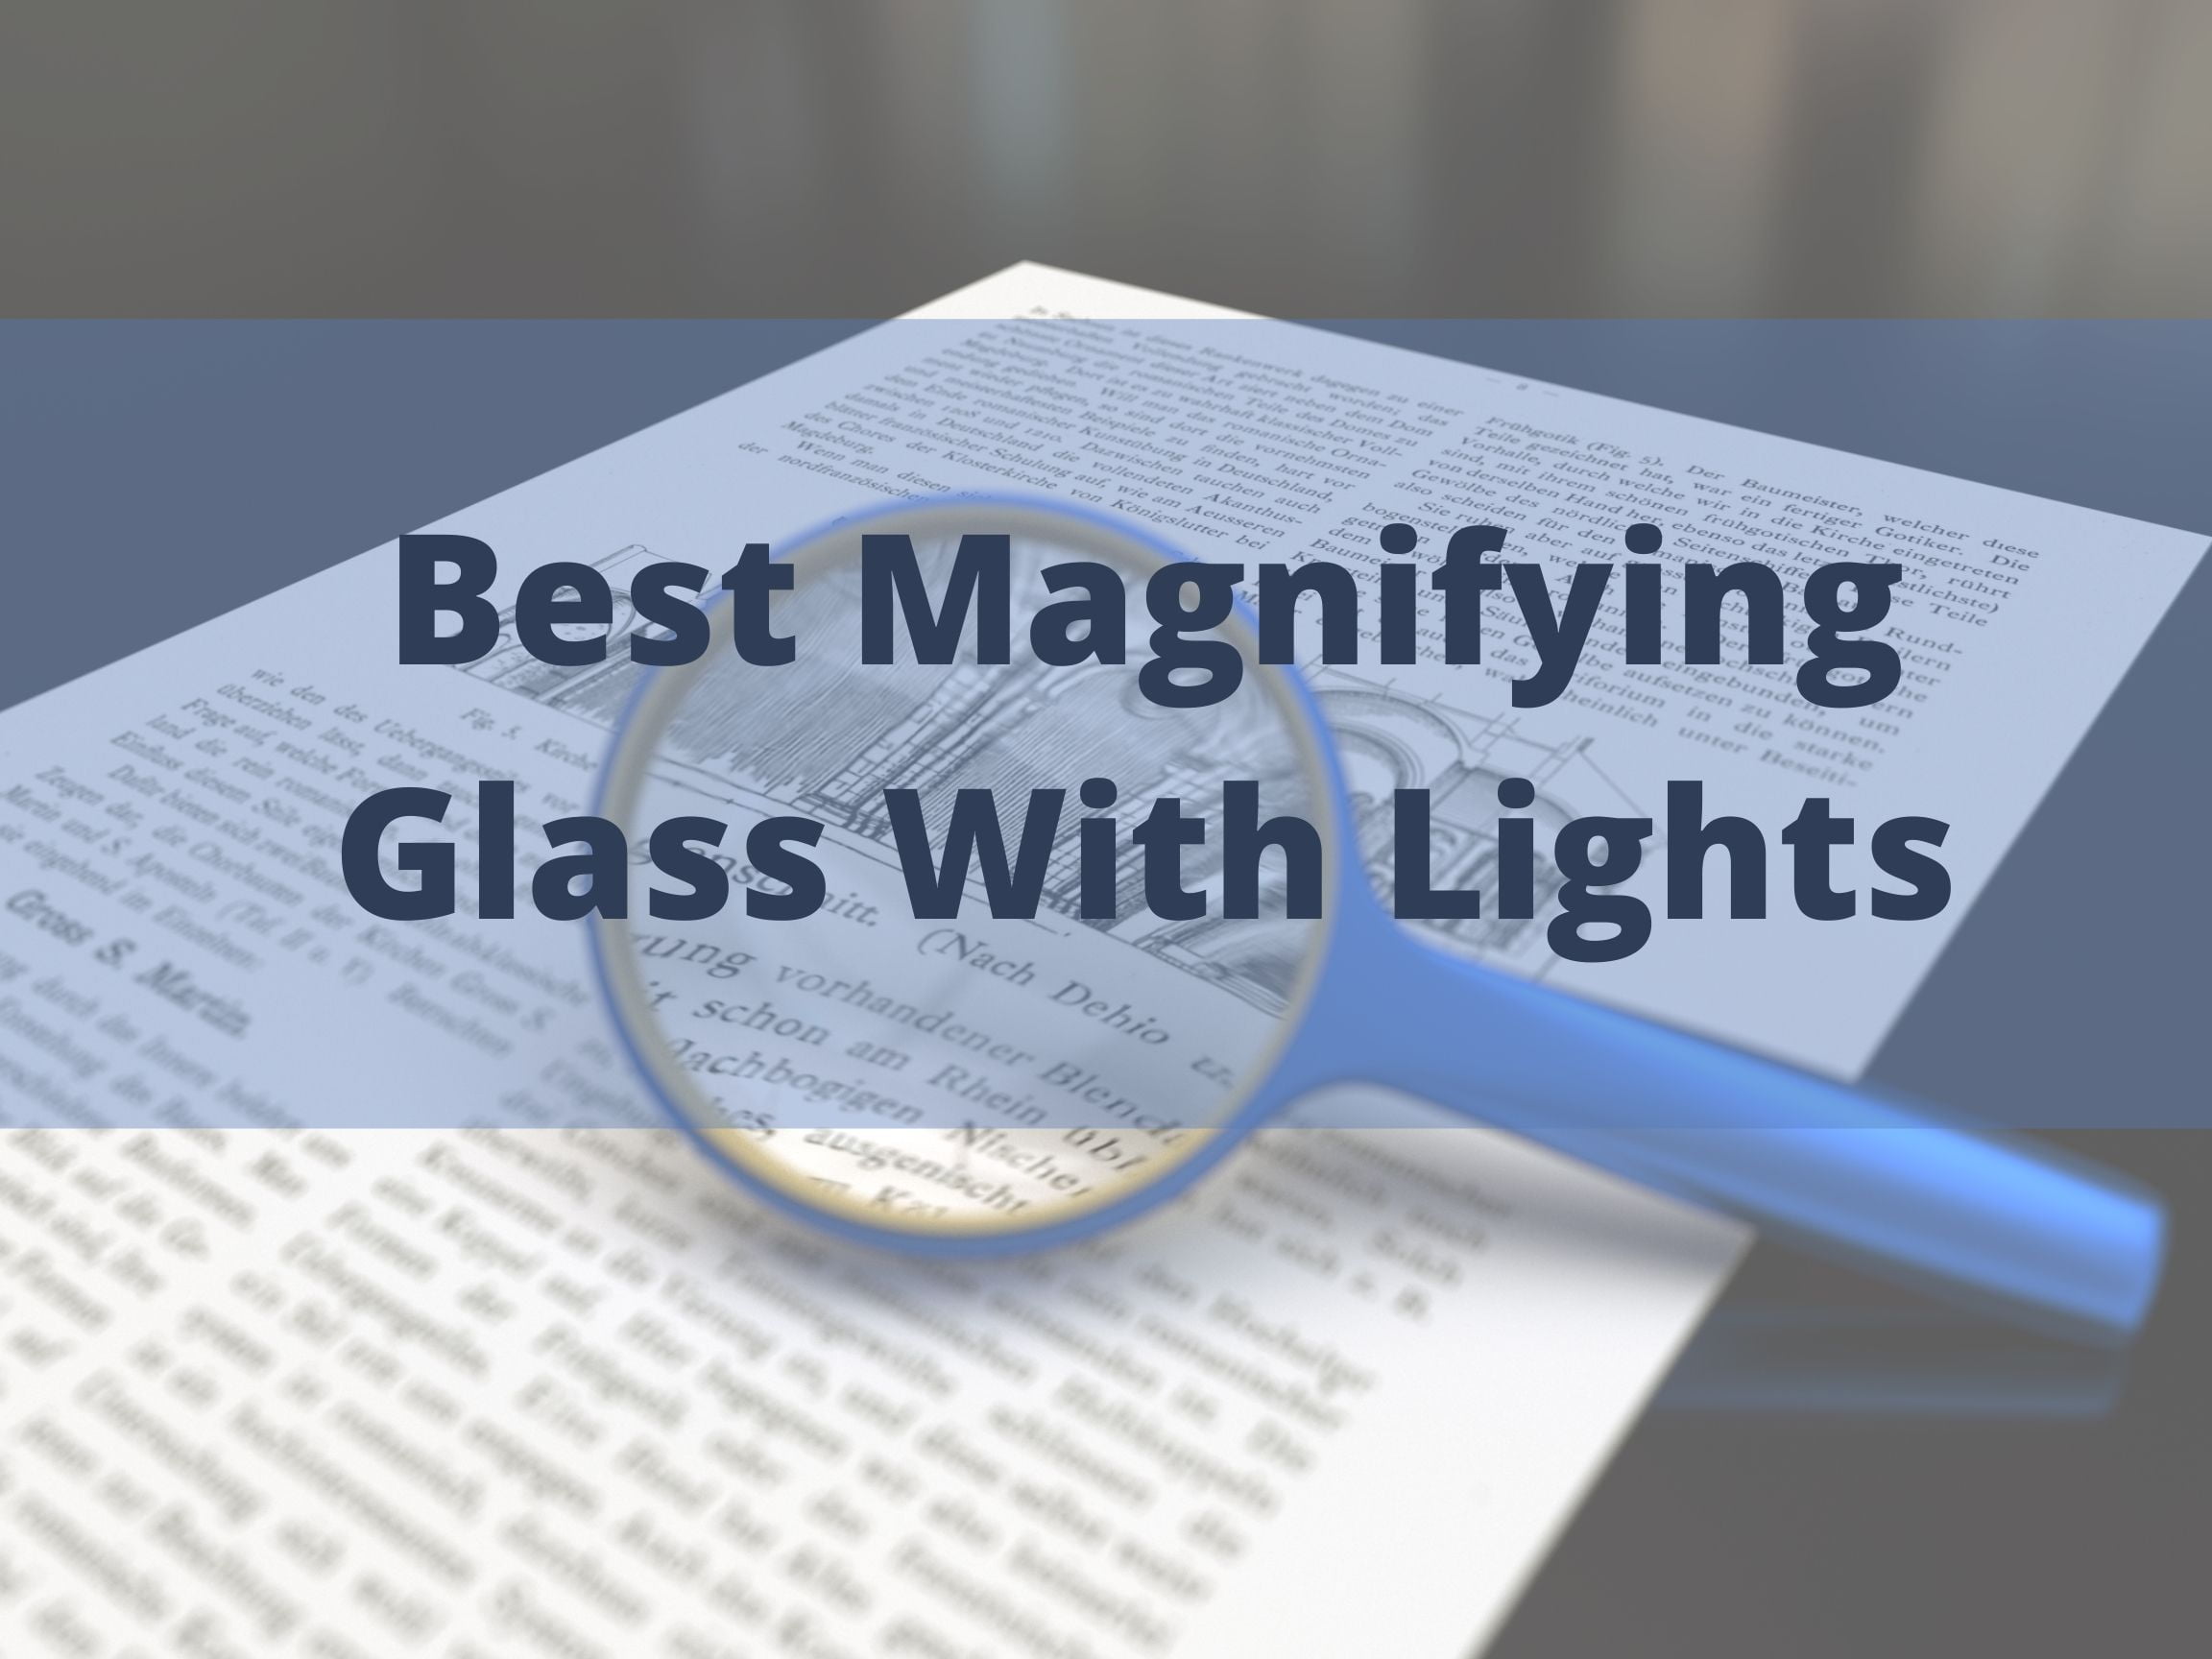 Magnifying Glass With Lights